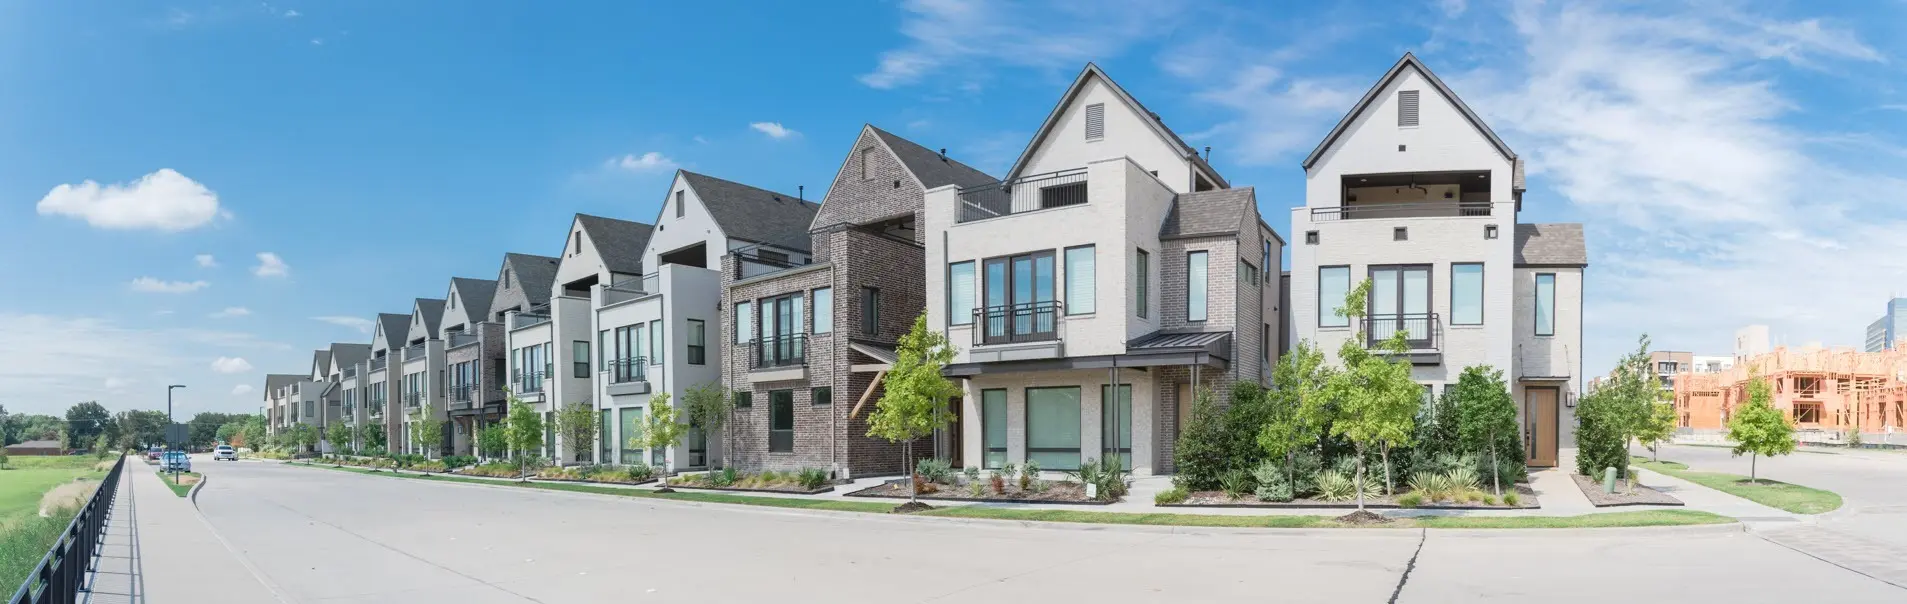 luxury townhomes for sale